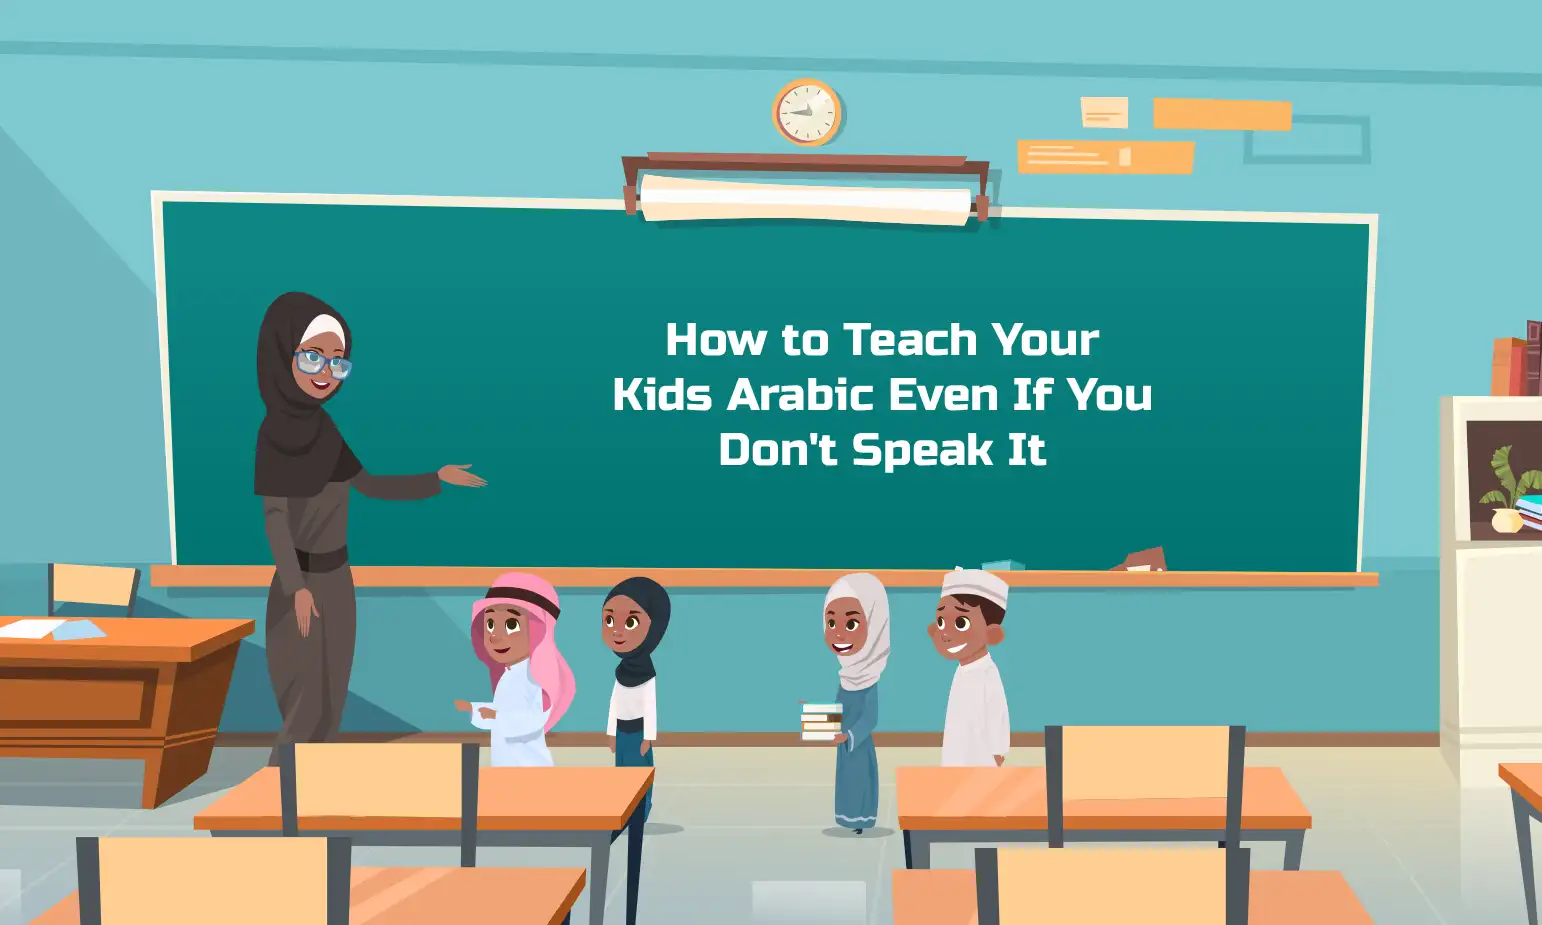 How to Teach Your Kids Arabic Even If You Don't Speak It